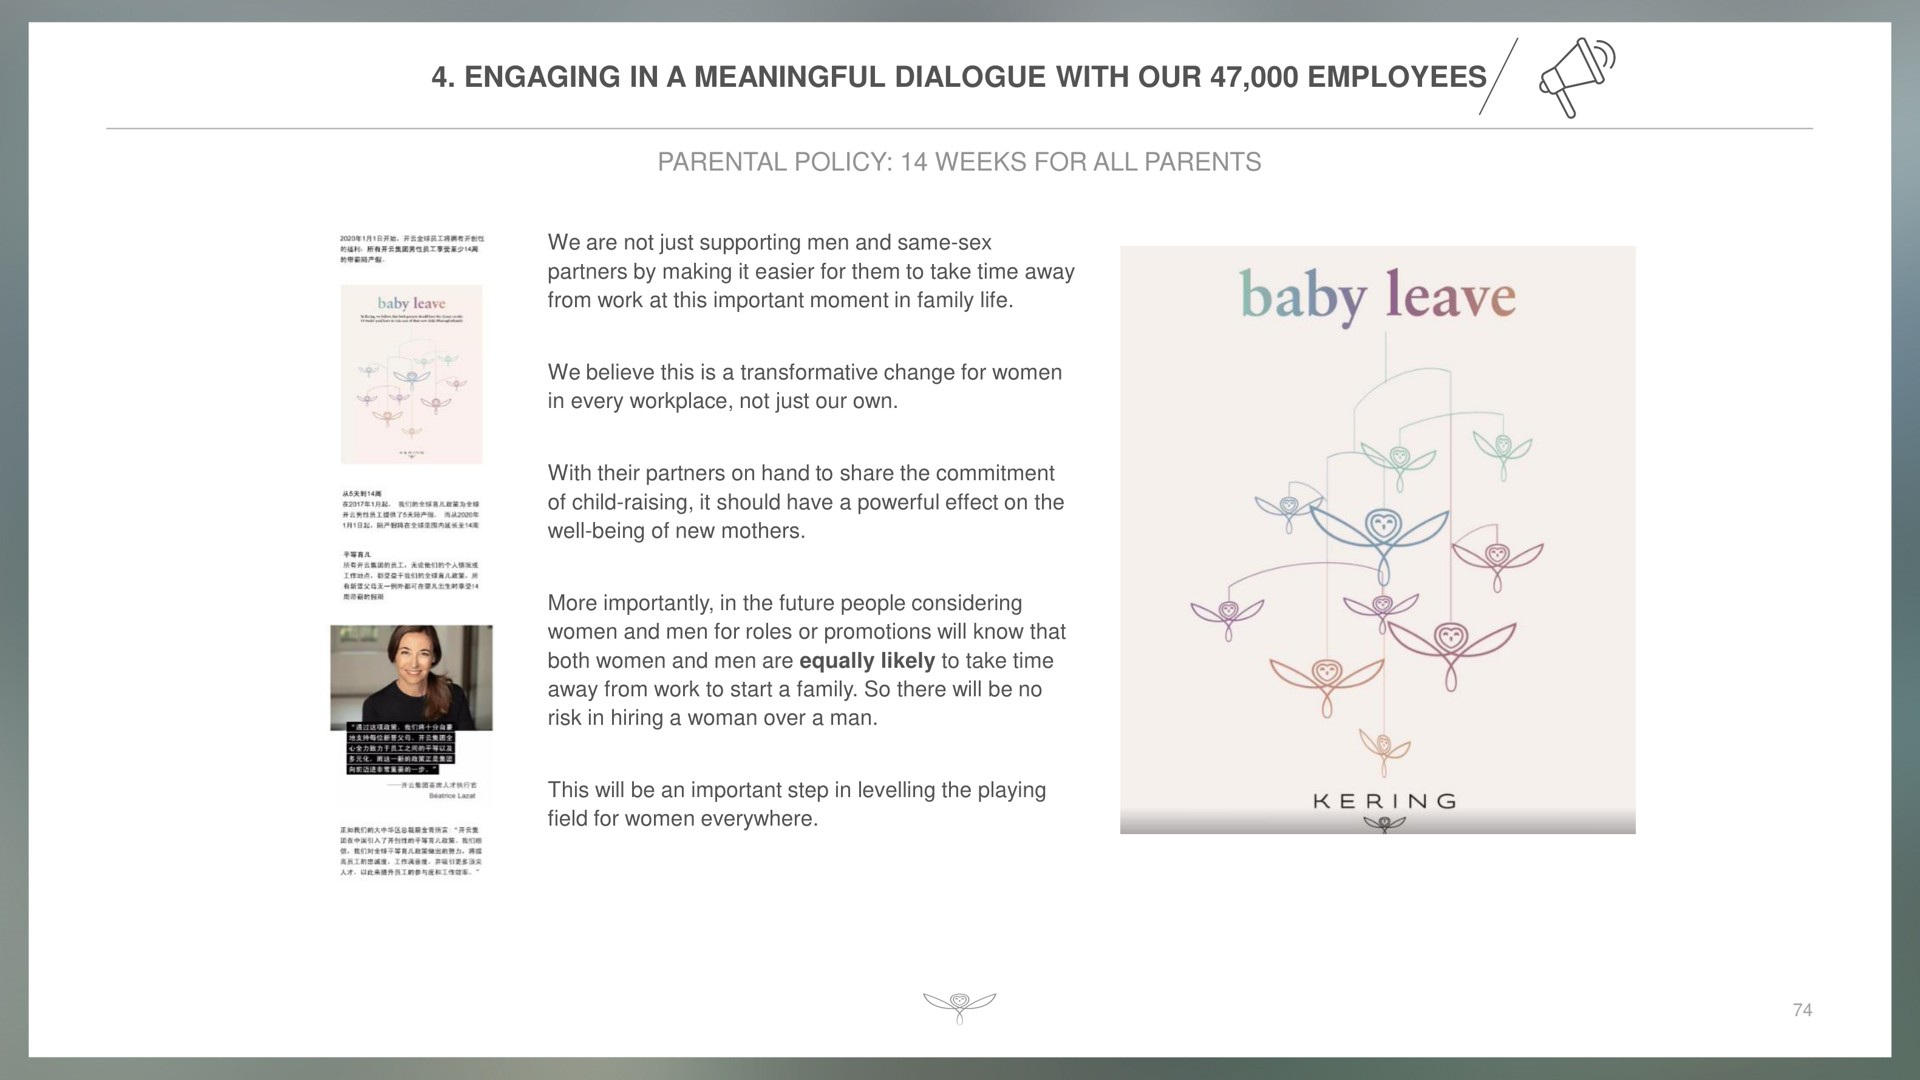 engaging in a meaningful dialogue with our employees parental policy weeks for all parents baby leave | Kering